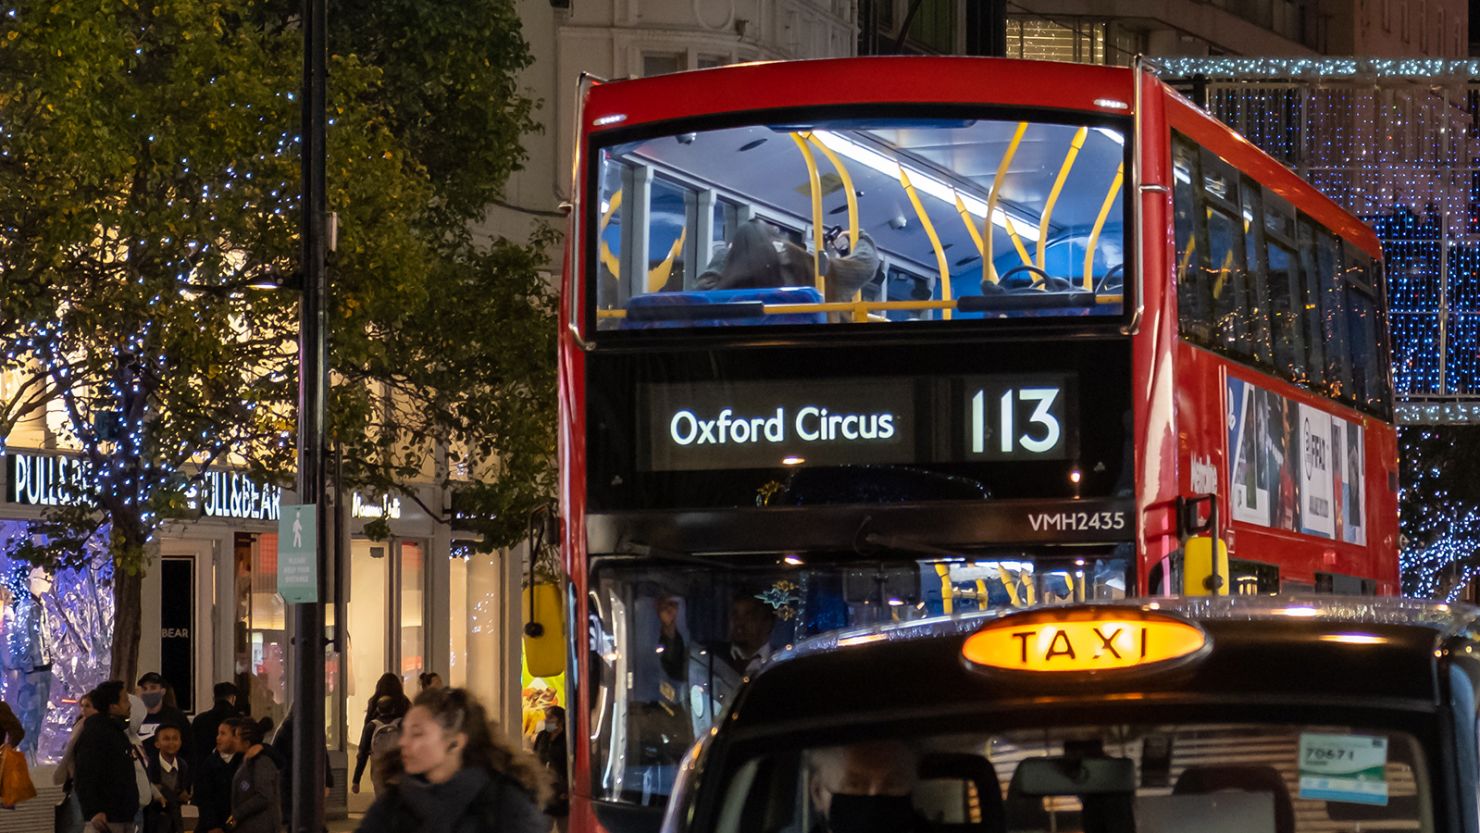 One of the incidents took place on a bus near Oxford Circus in central London.